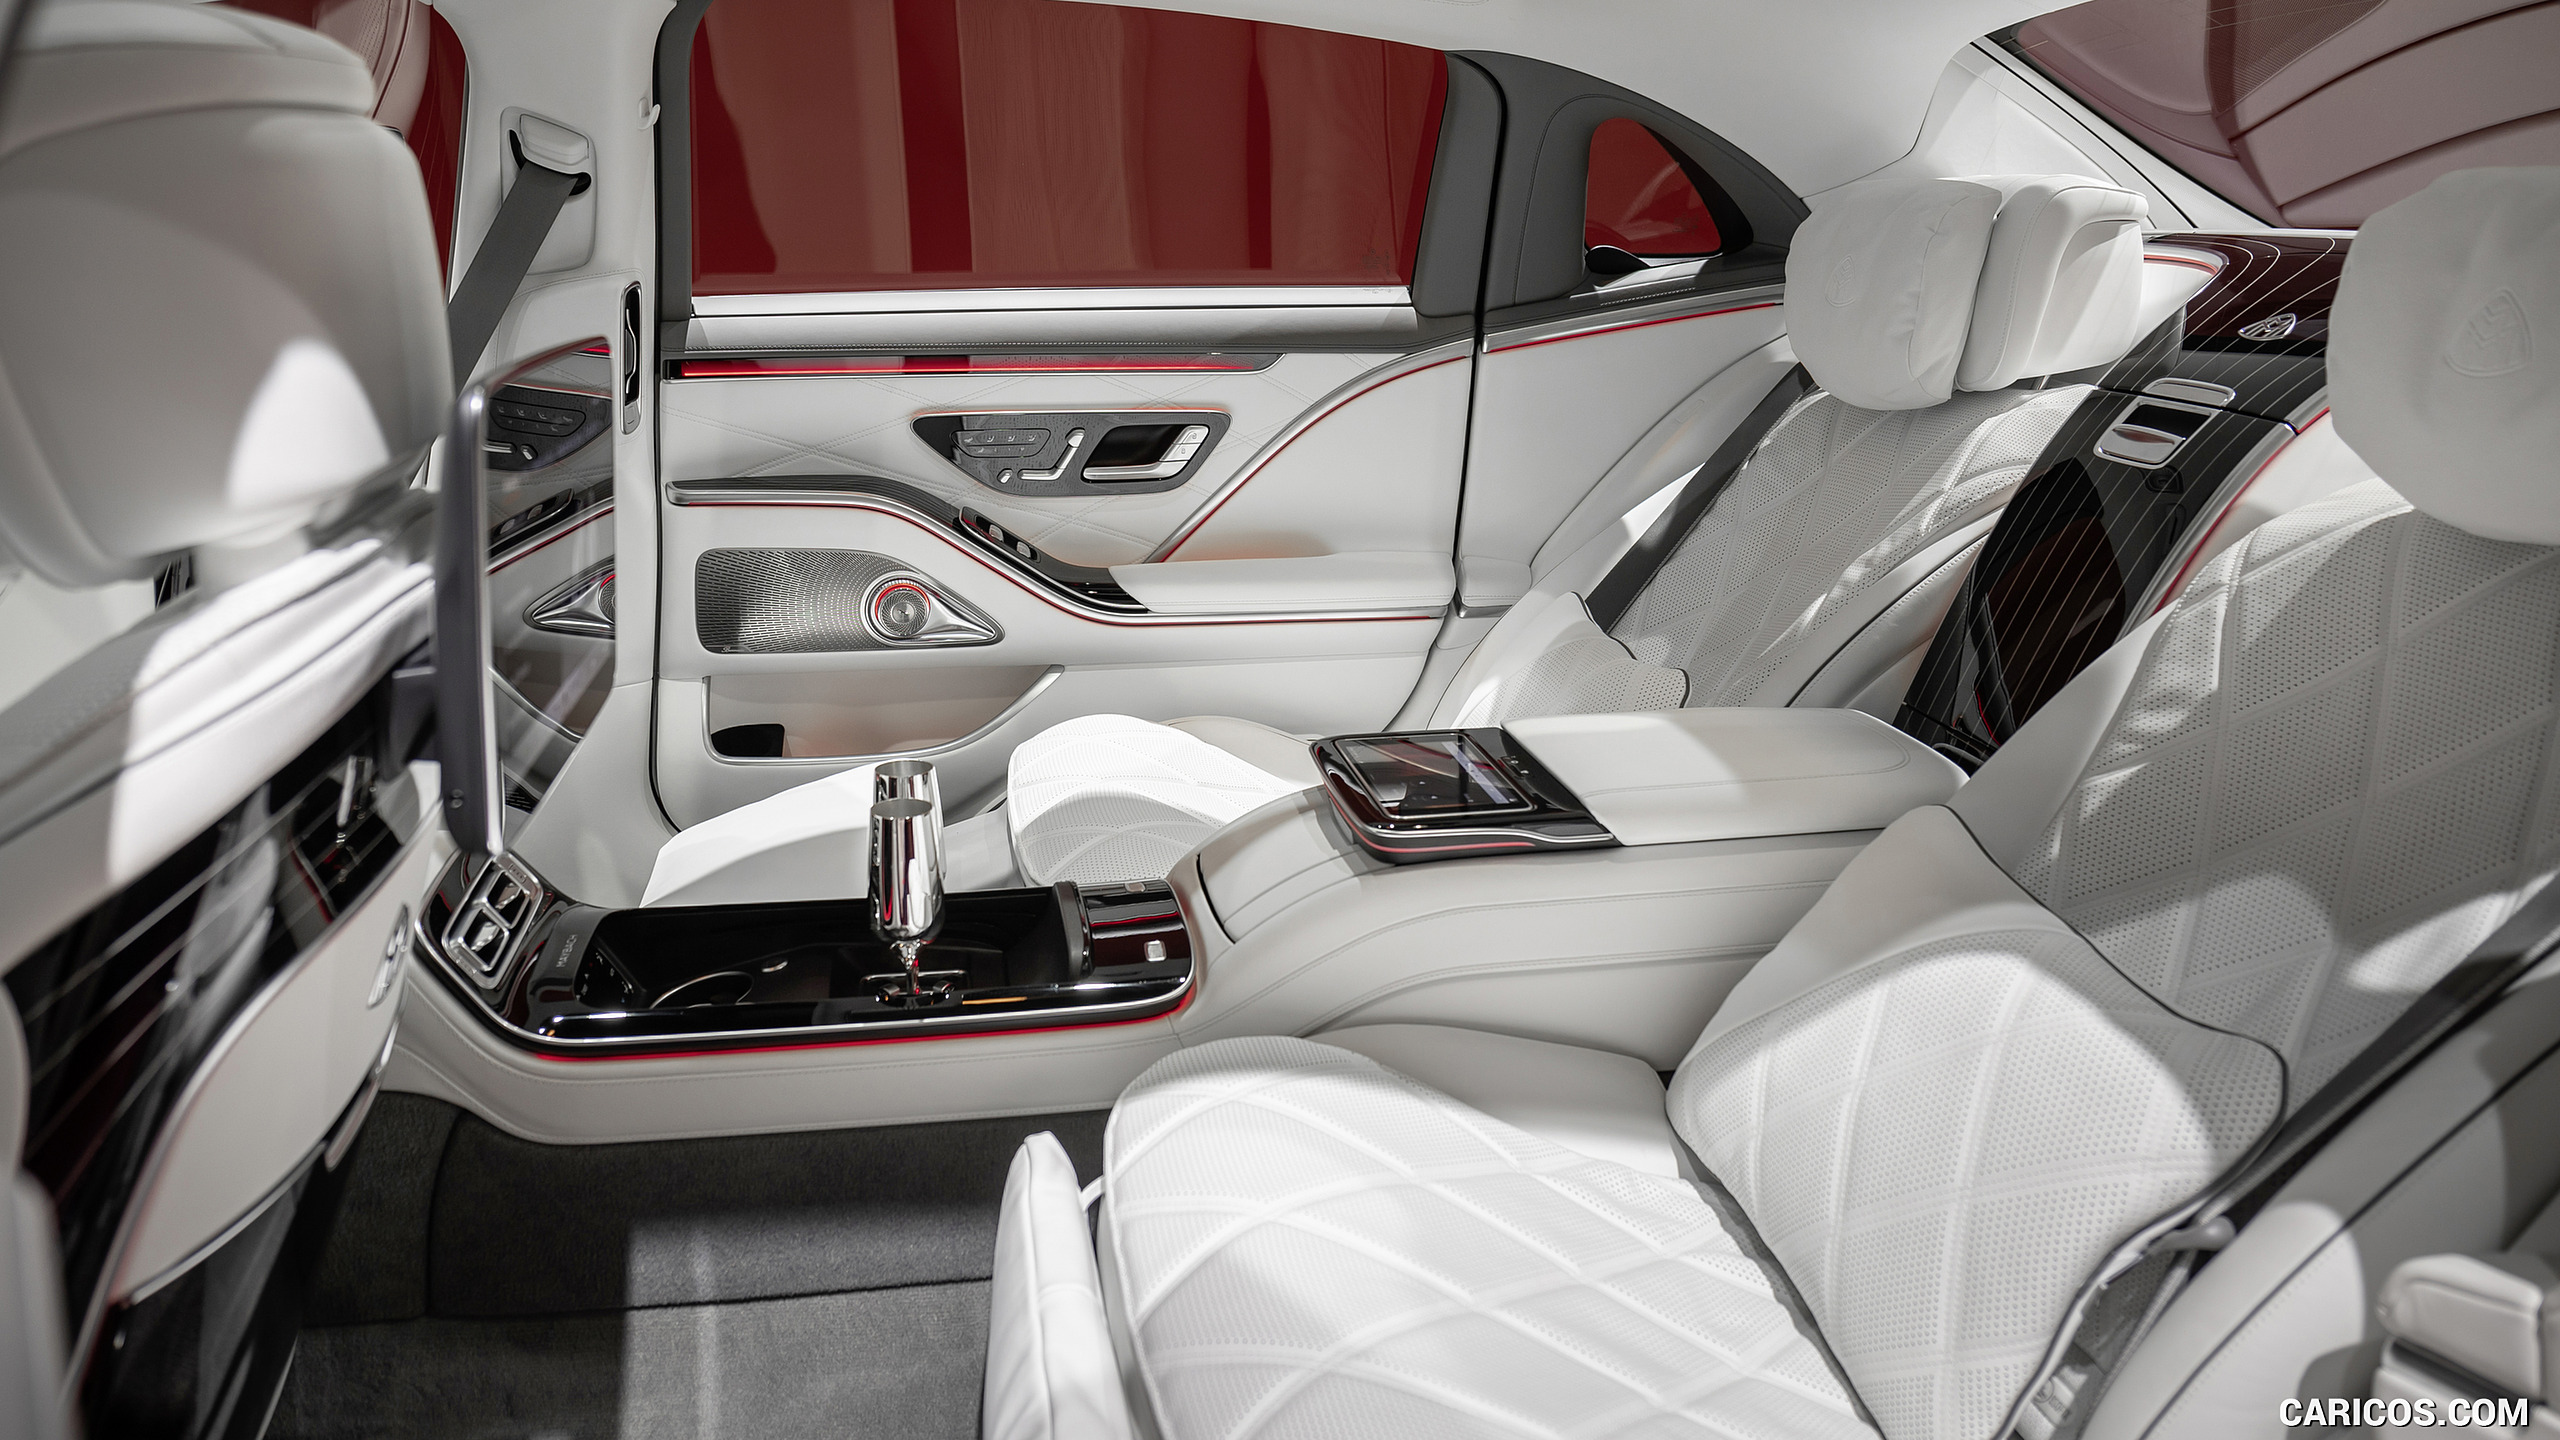 2021 Mercedes-Maybach S-Class - Interior, Rear Seats, #155 of 157